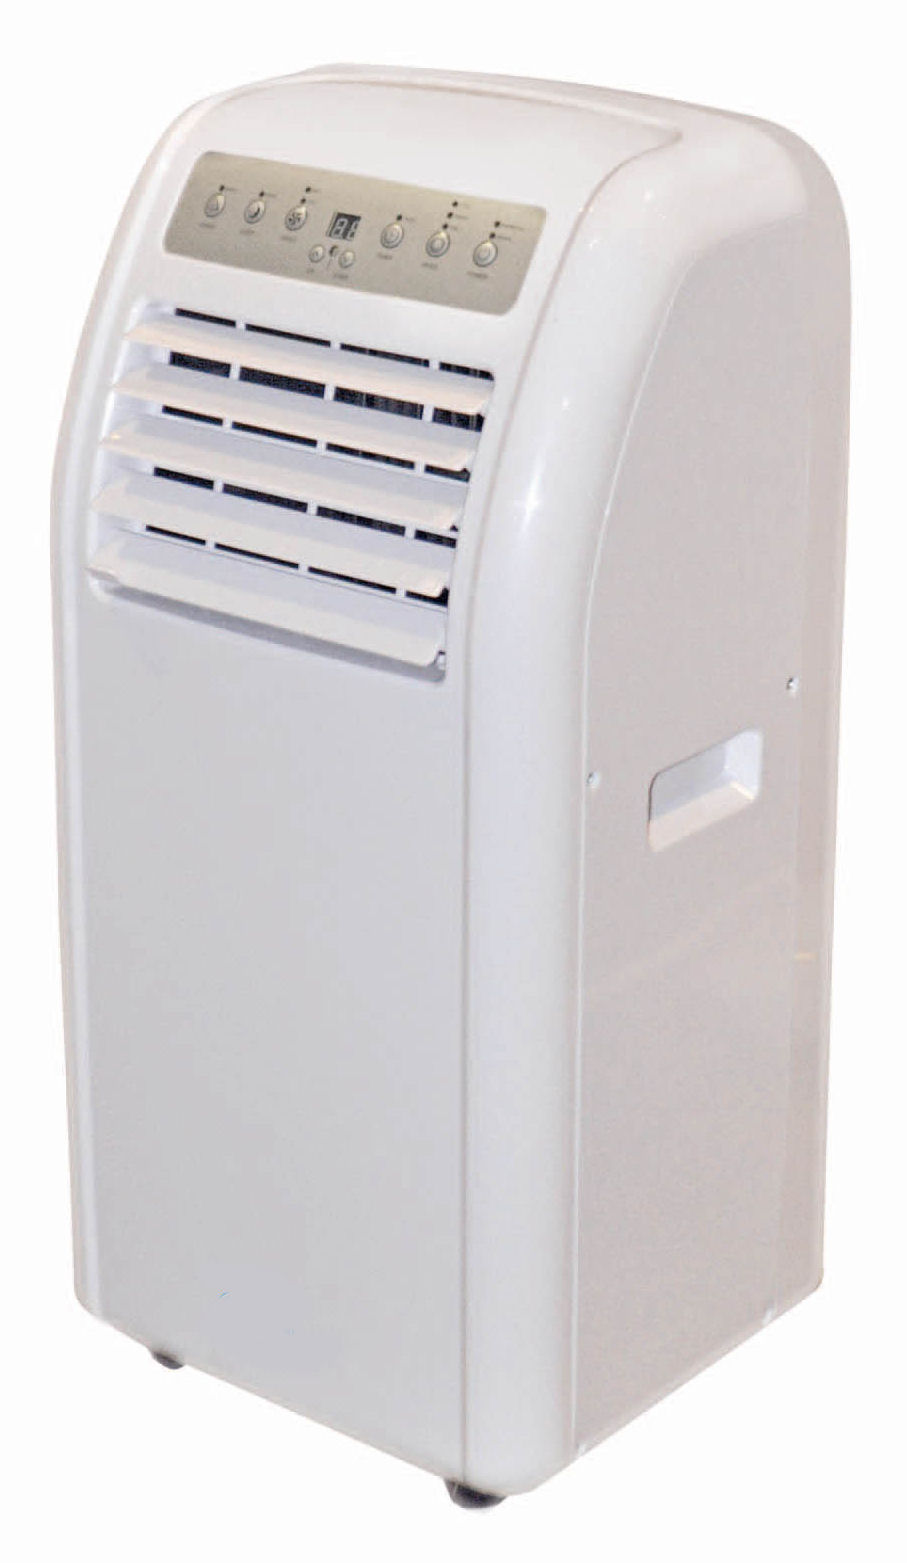 Air Conditioning Rental Chelsea - Chilly Pepper Hire